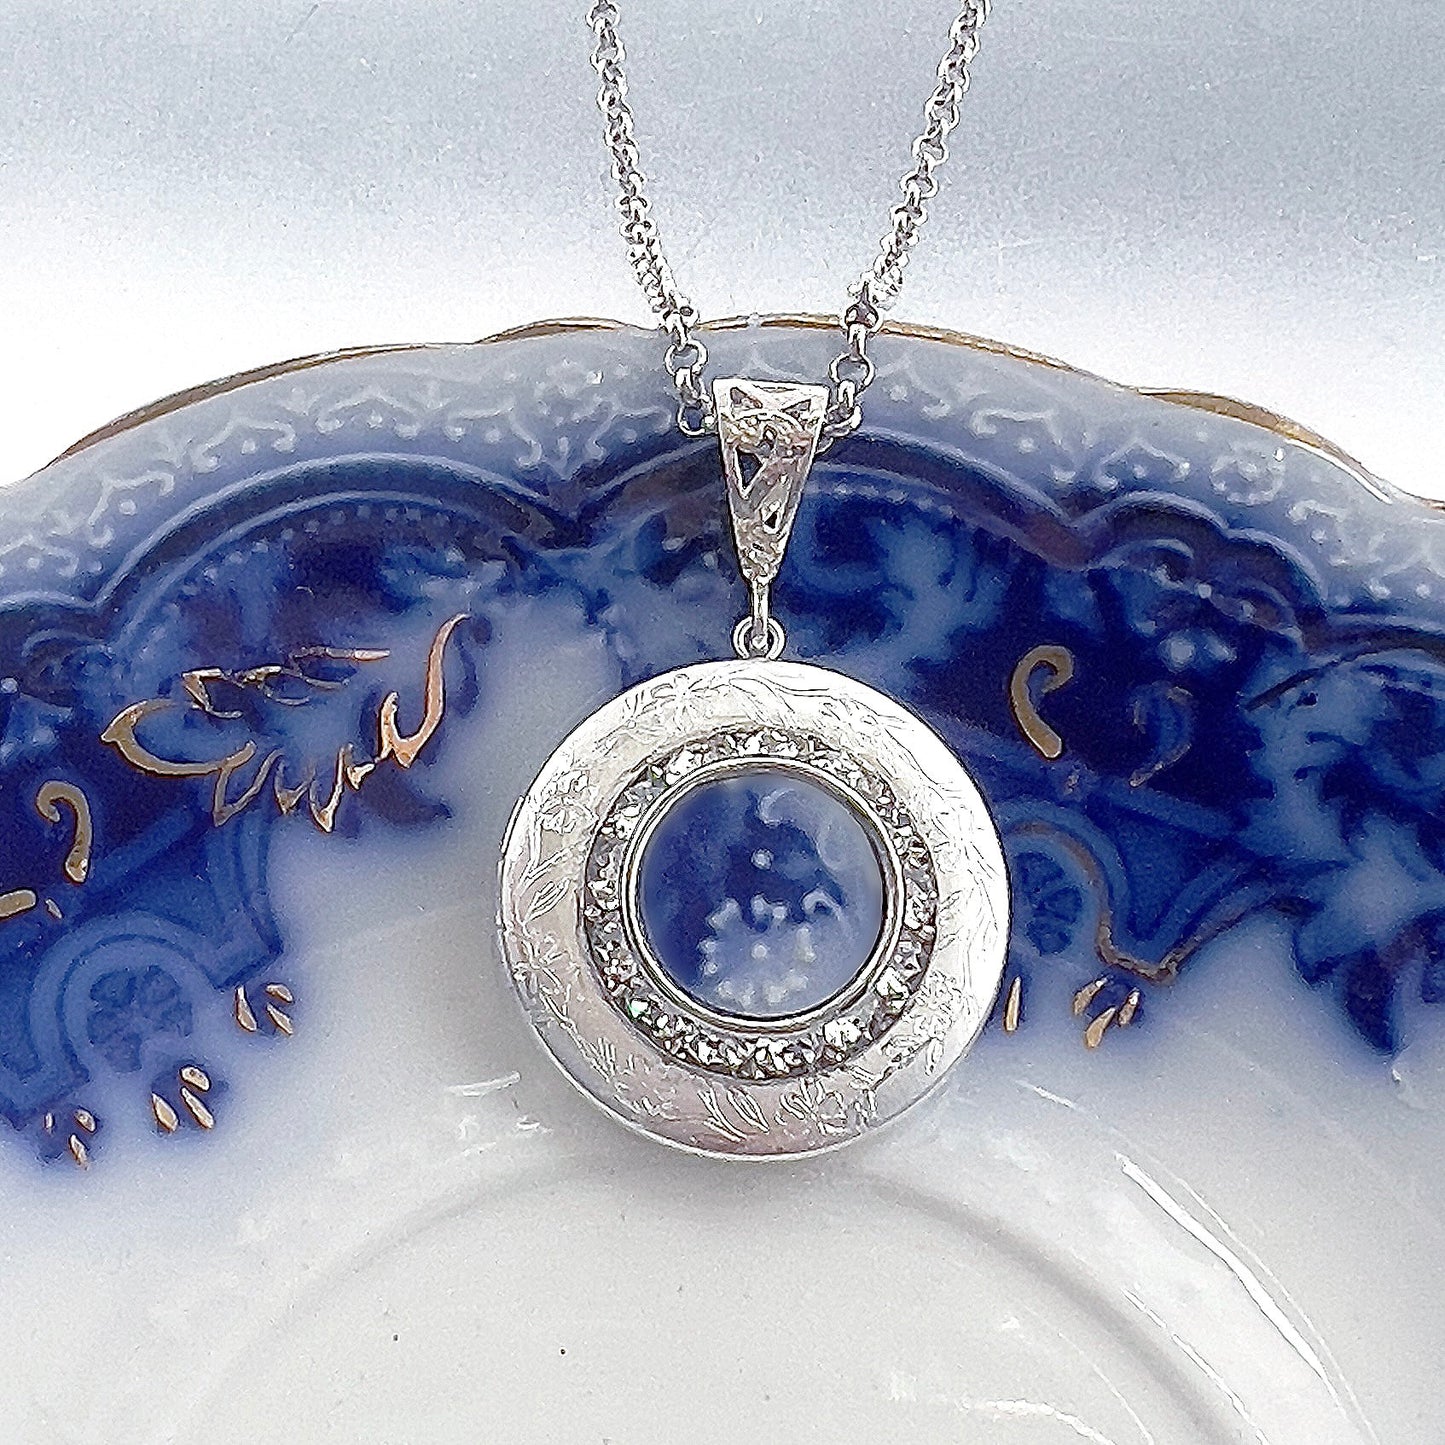 Flow Blue Locket Necklace, Antique Broken China Jewelry, Unique Anniversary Gifts for Her, Blue and White